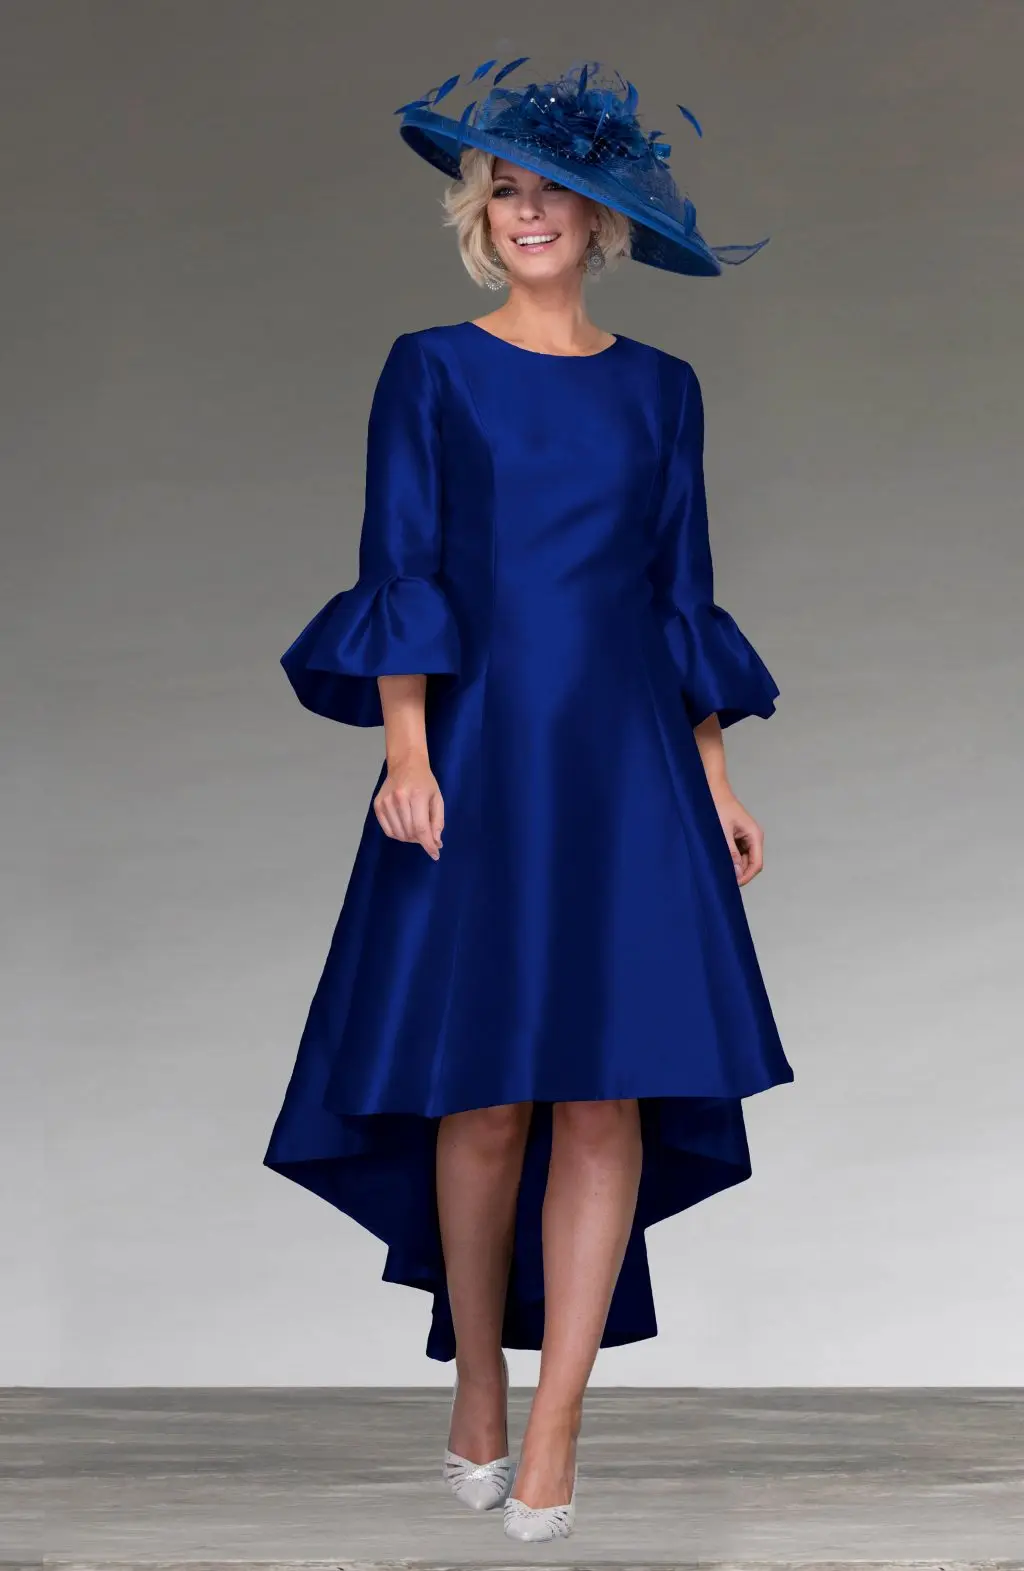 

Azulon short front long back satin outfit Dipped Hem fluted cuff three quarter length Bell Sleeves mother of the bride dresses